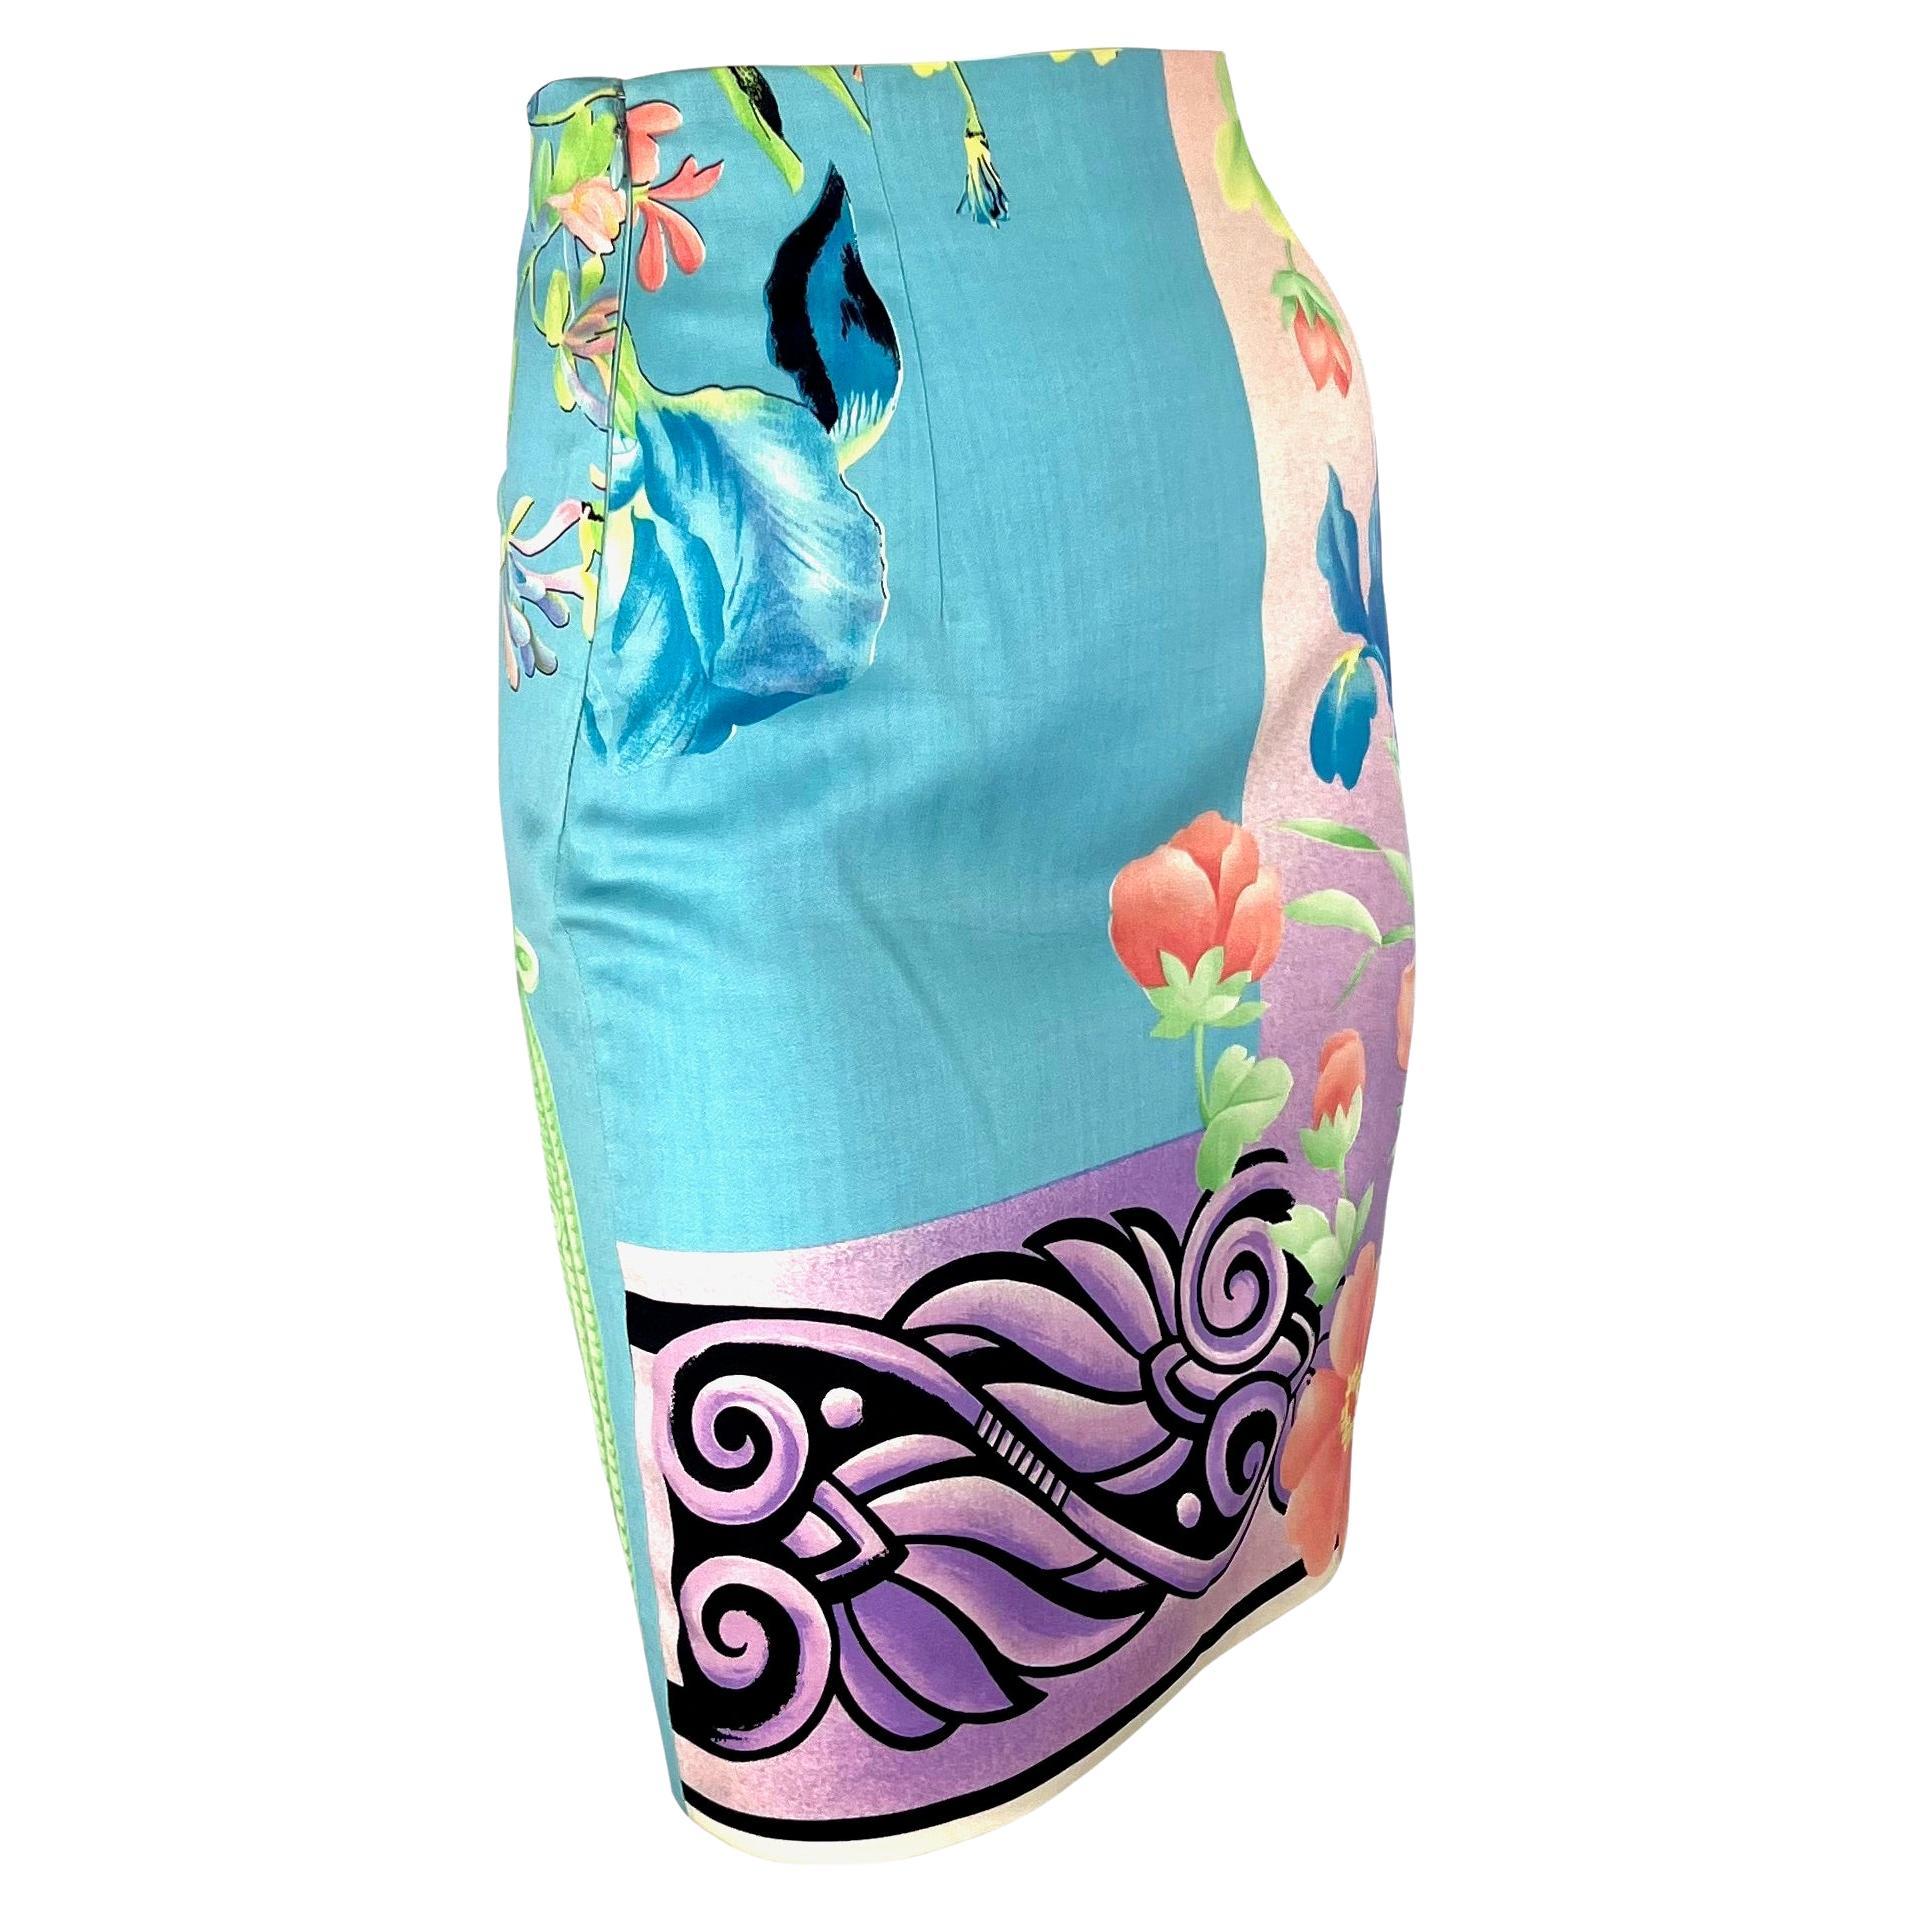 S/S 1992 Gianni Versace Couture Pastel Floral Mask Print Blue Pencil Skirt For Sale 2